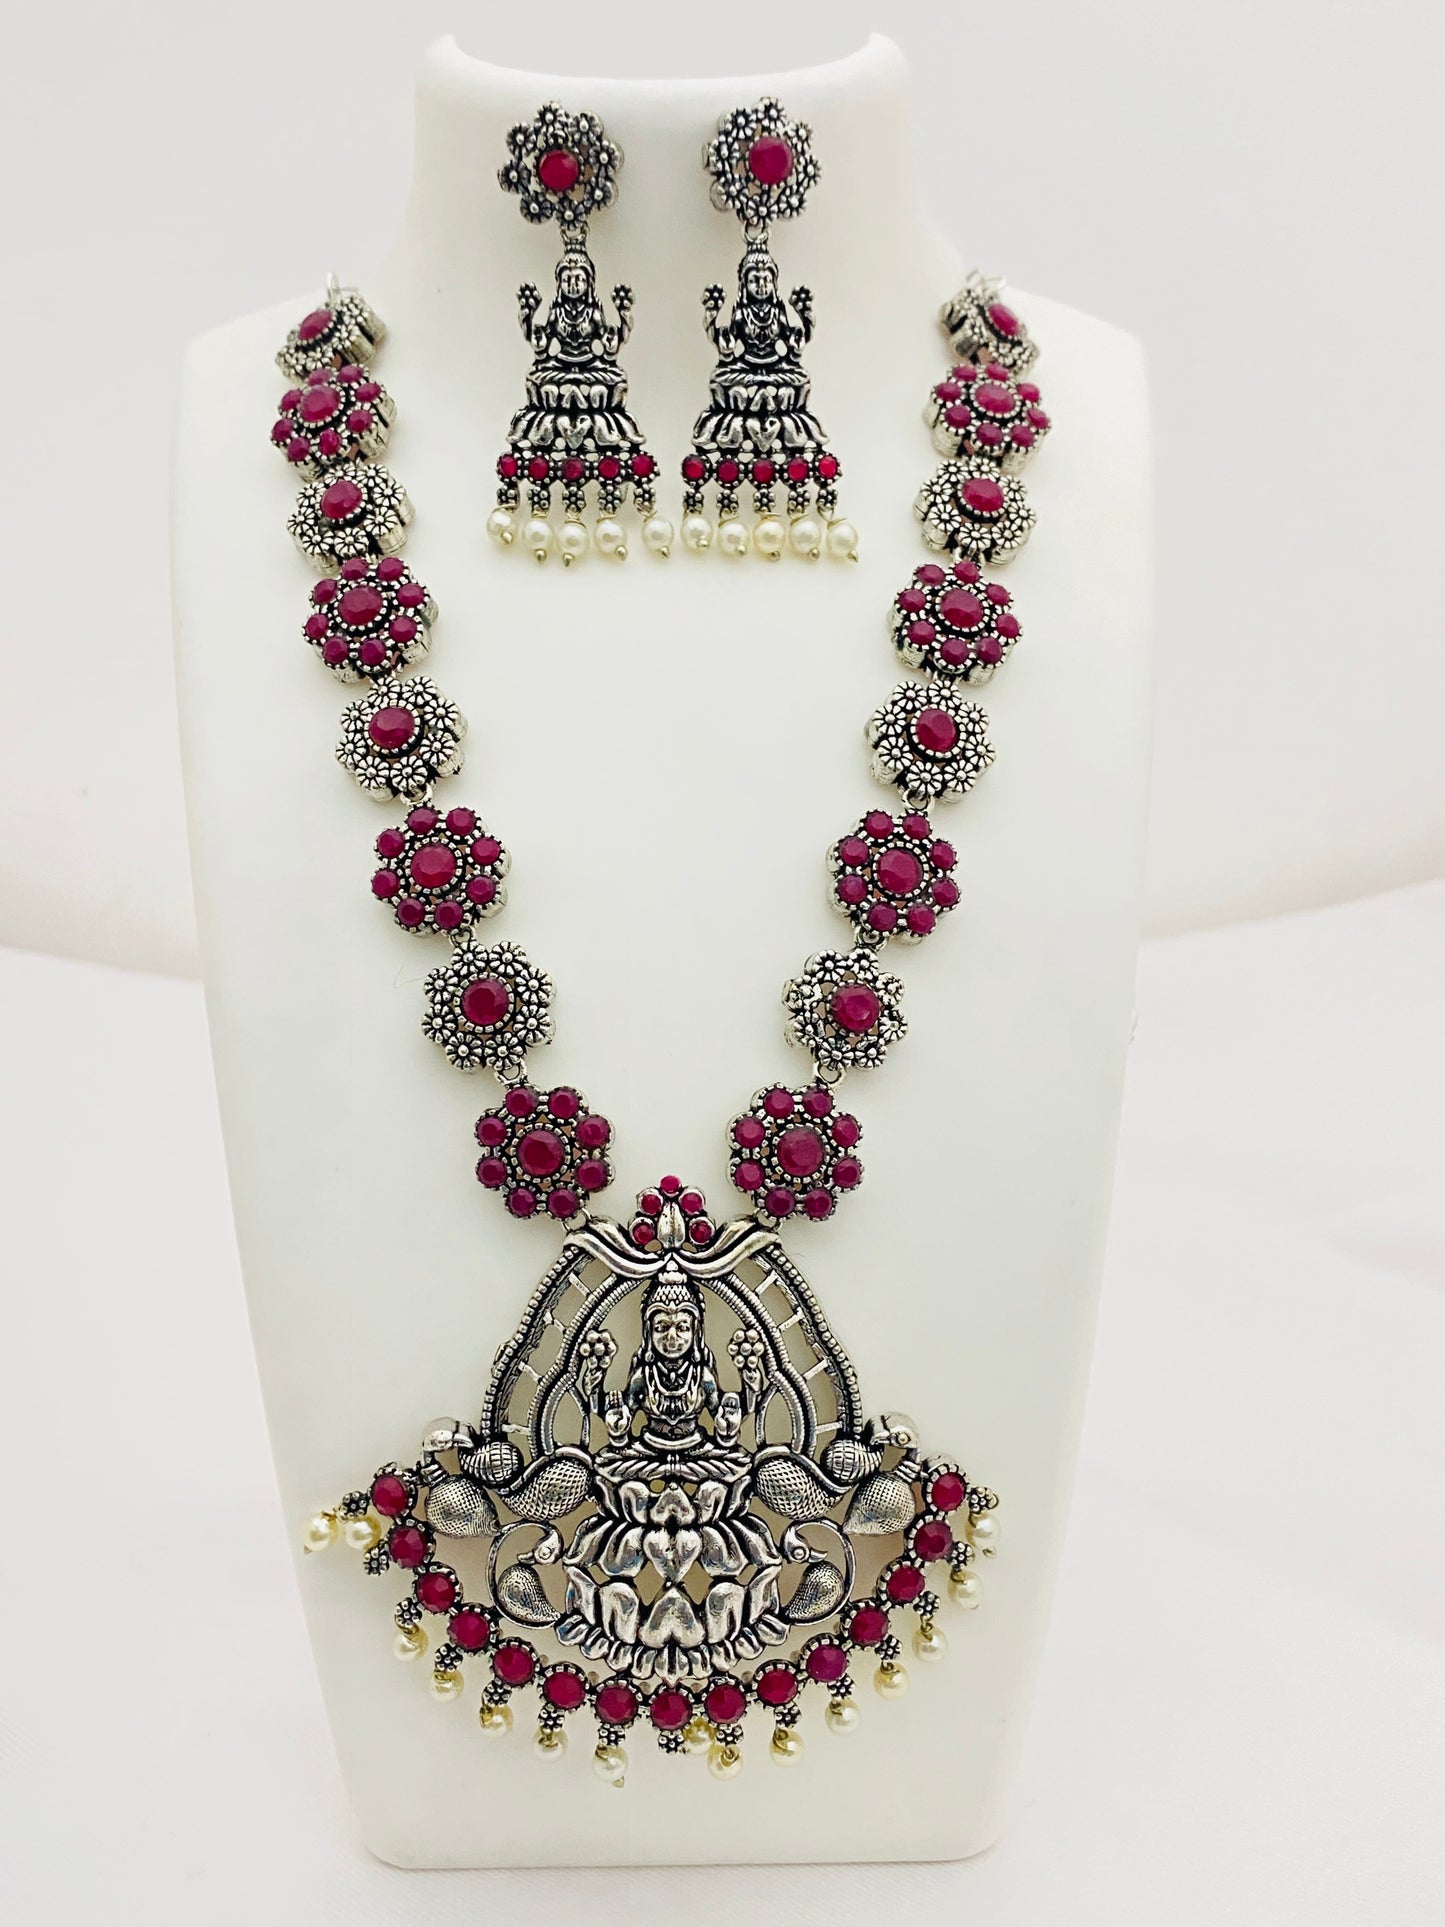 Stone Studded Goddess Lakshmi Pendant Necklace Set With Earrings in Happy Jack